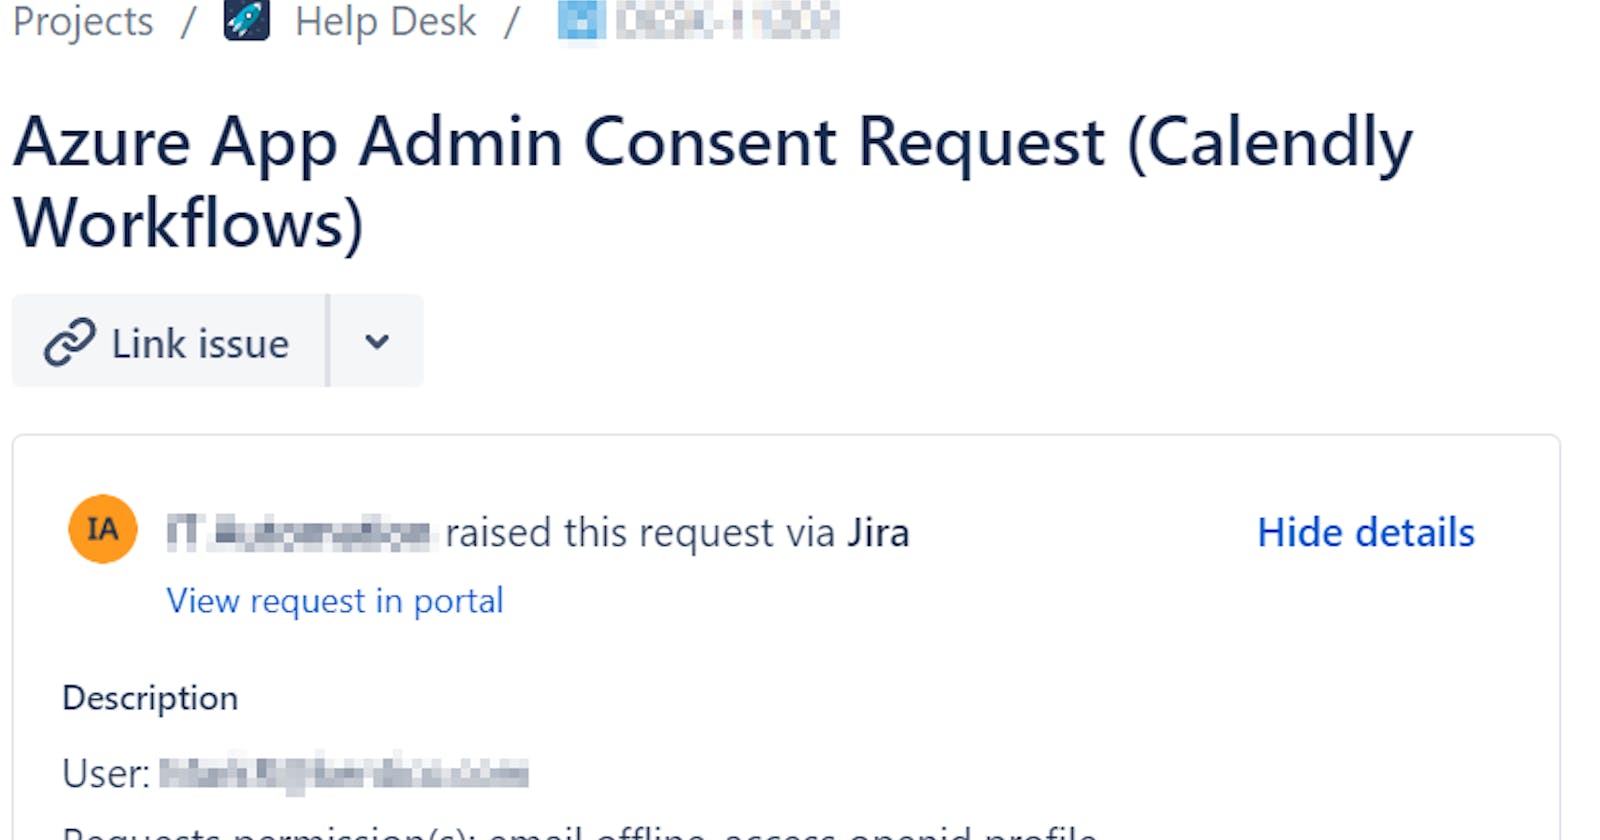 Automatic Jira ticket creation for Azure application admin consent requests